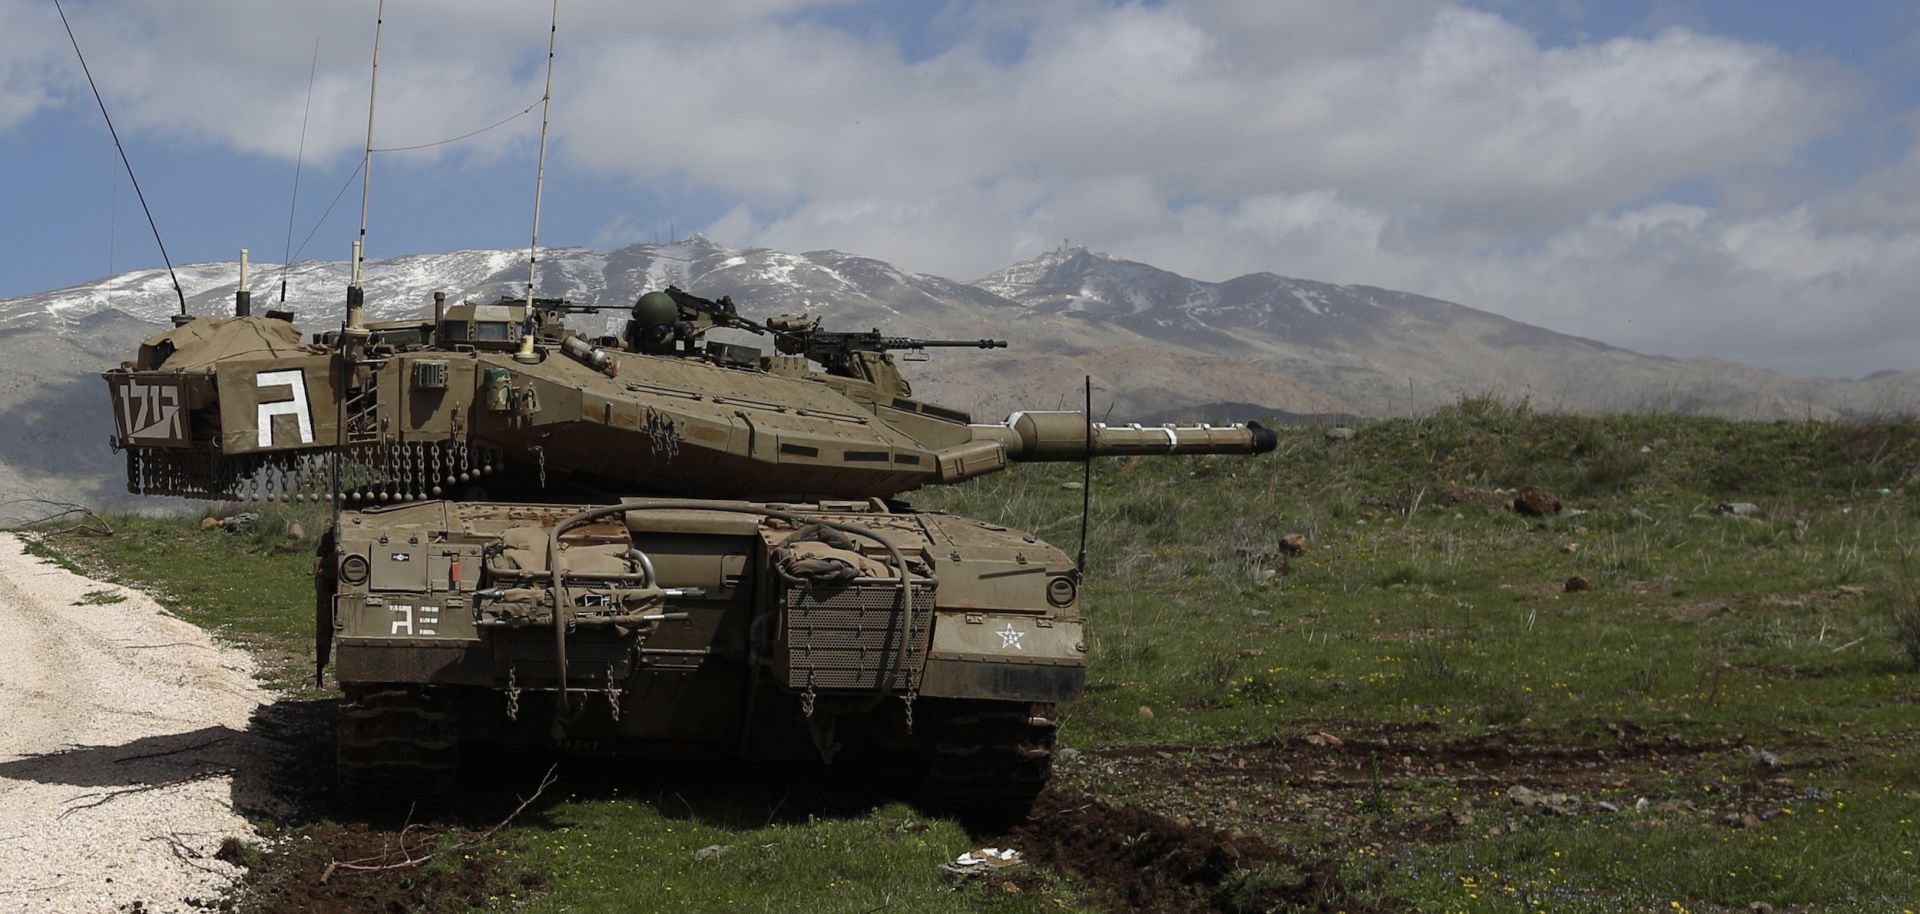 An Israeli army tank is stationed near the village of Majdal Shams, in the Israeli-annexed Golan Heights, on March 19, 2014.